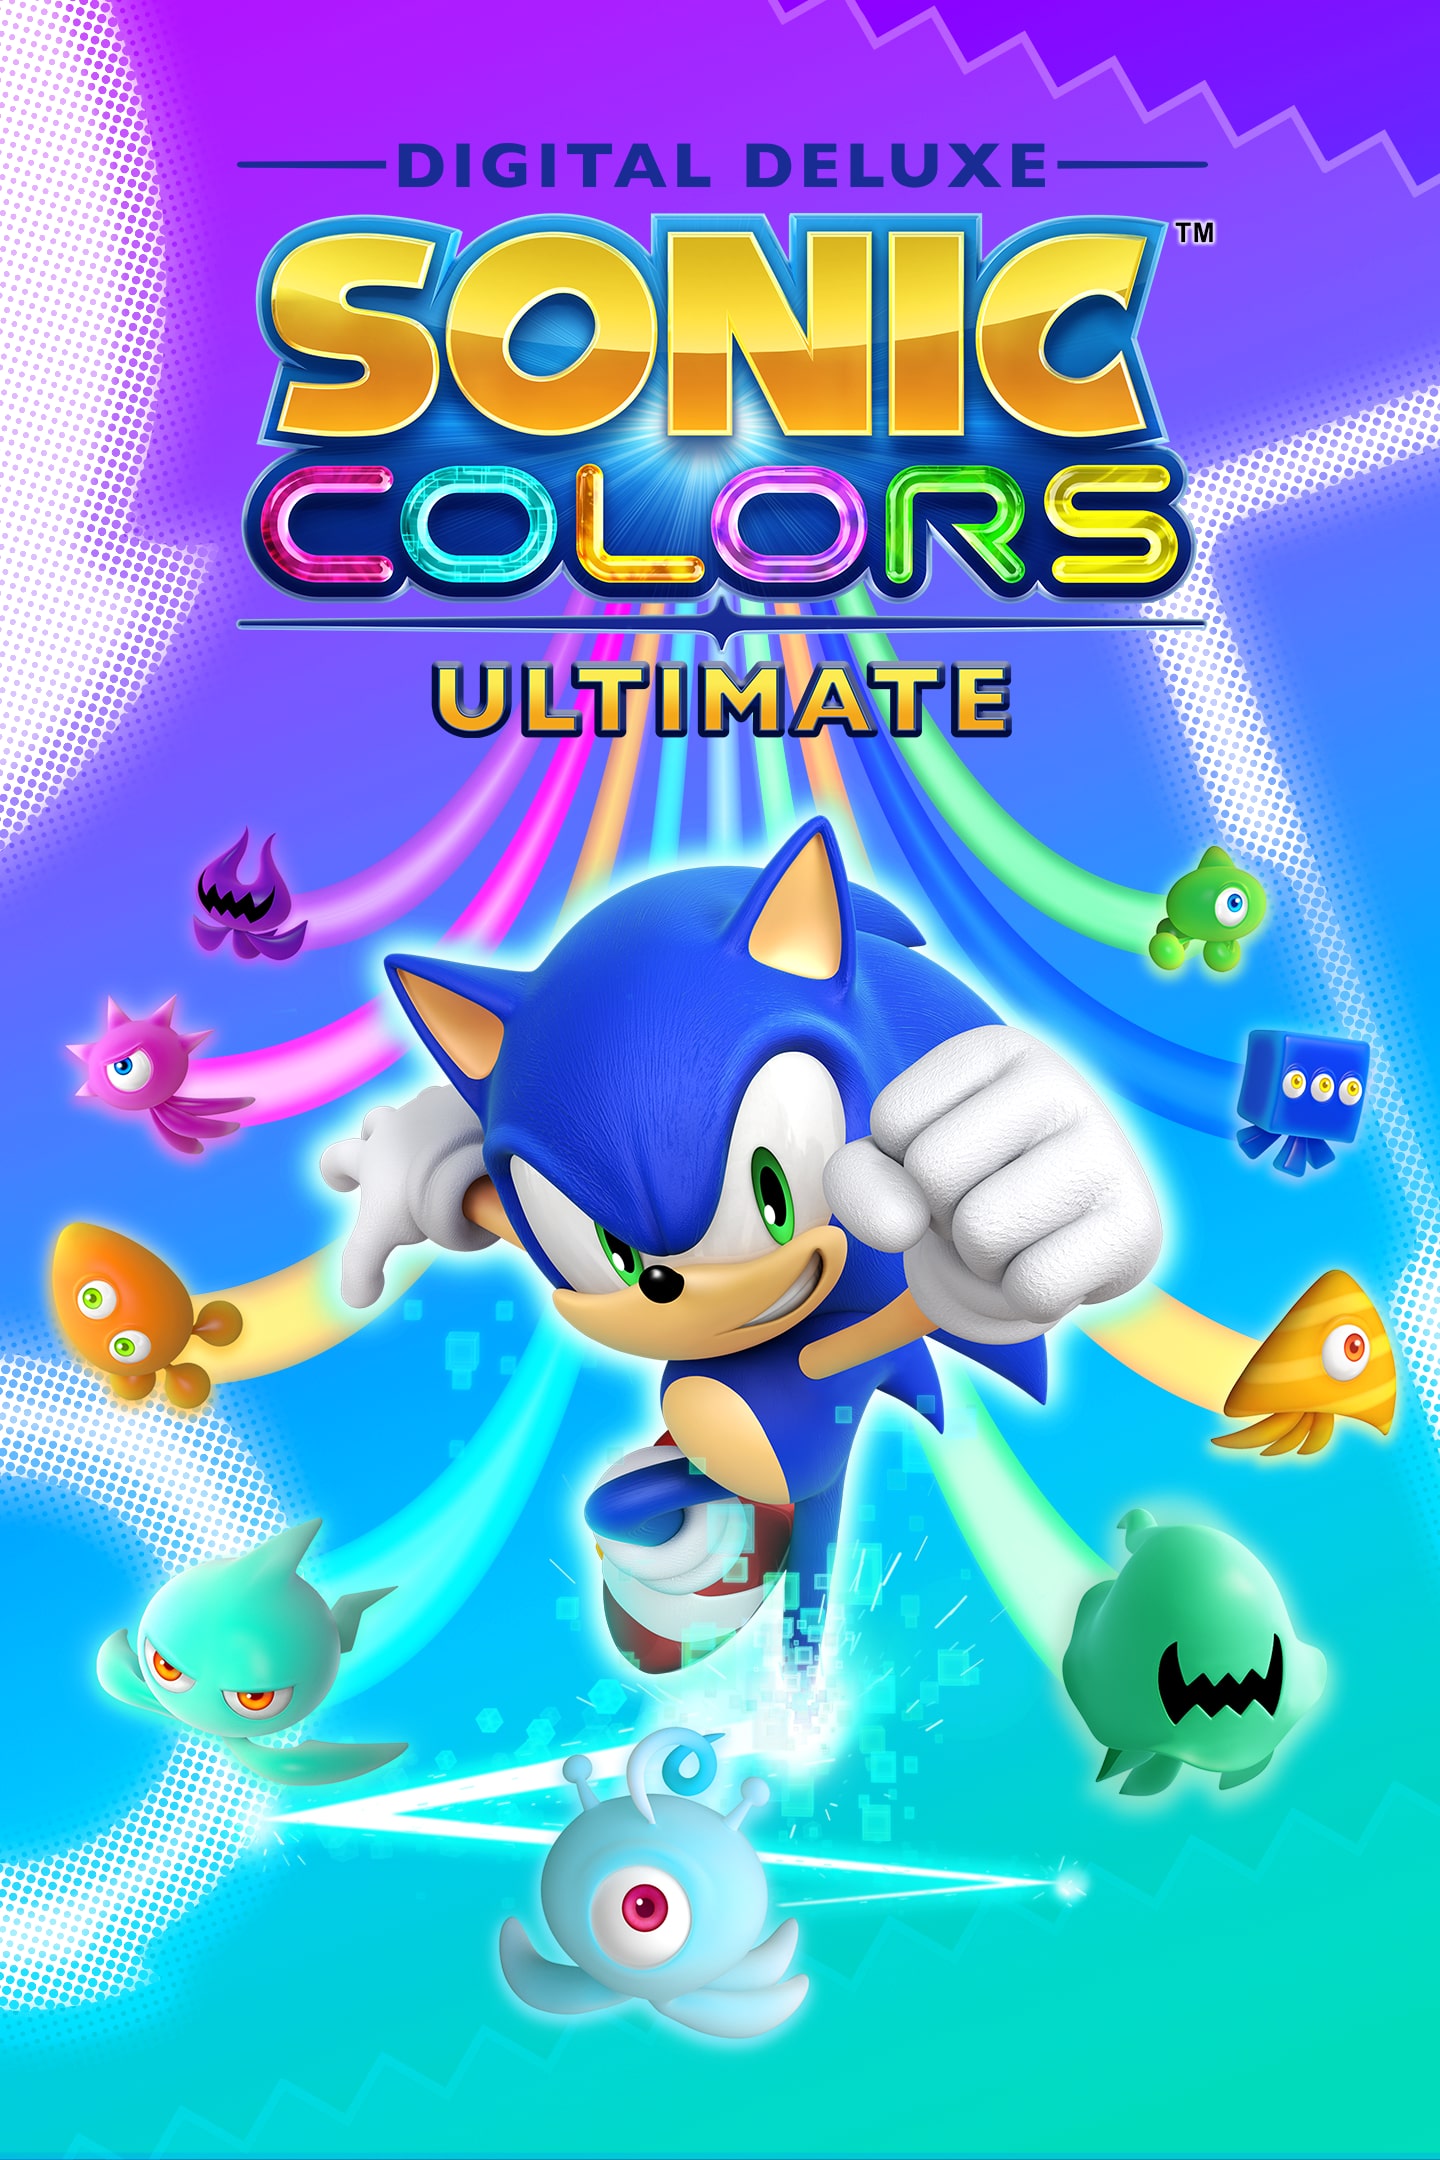 Sonic Colours (Wii)